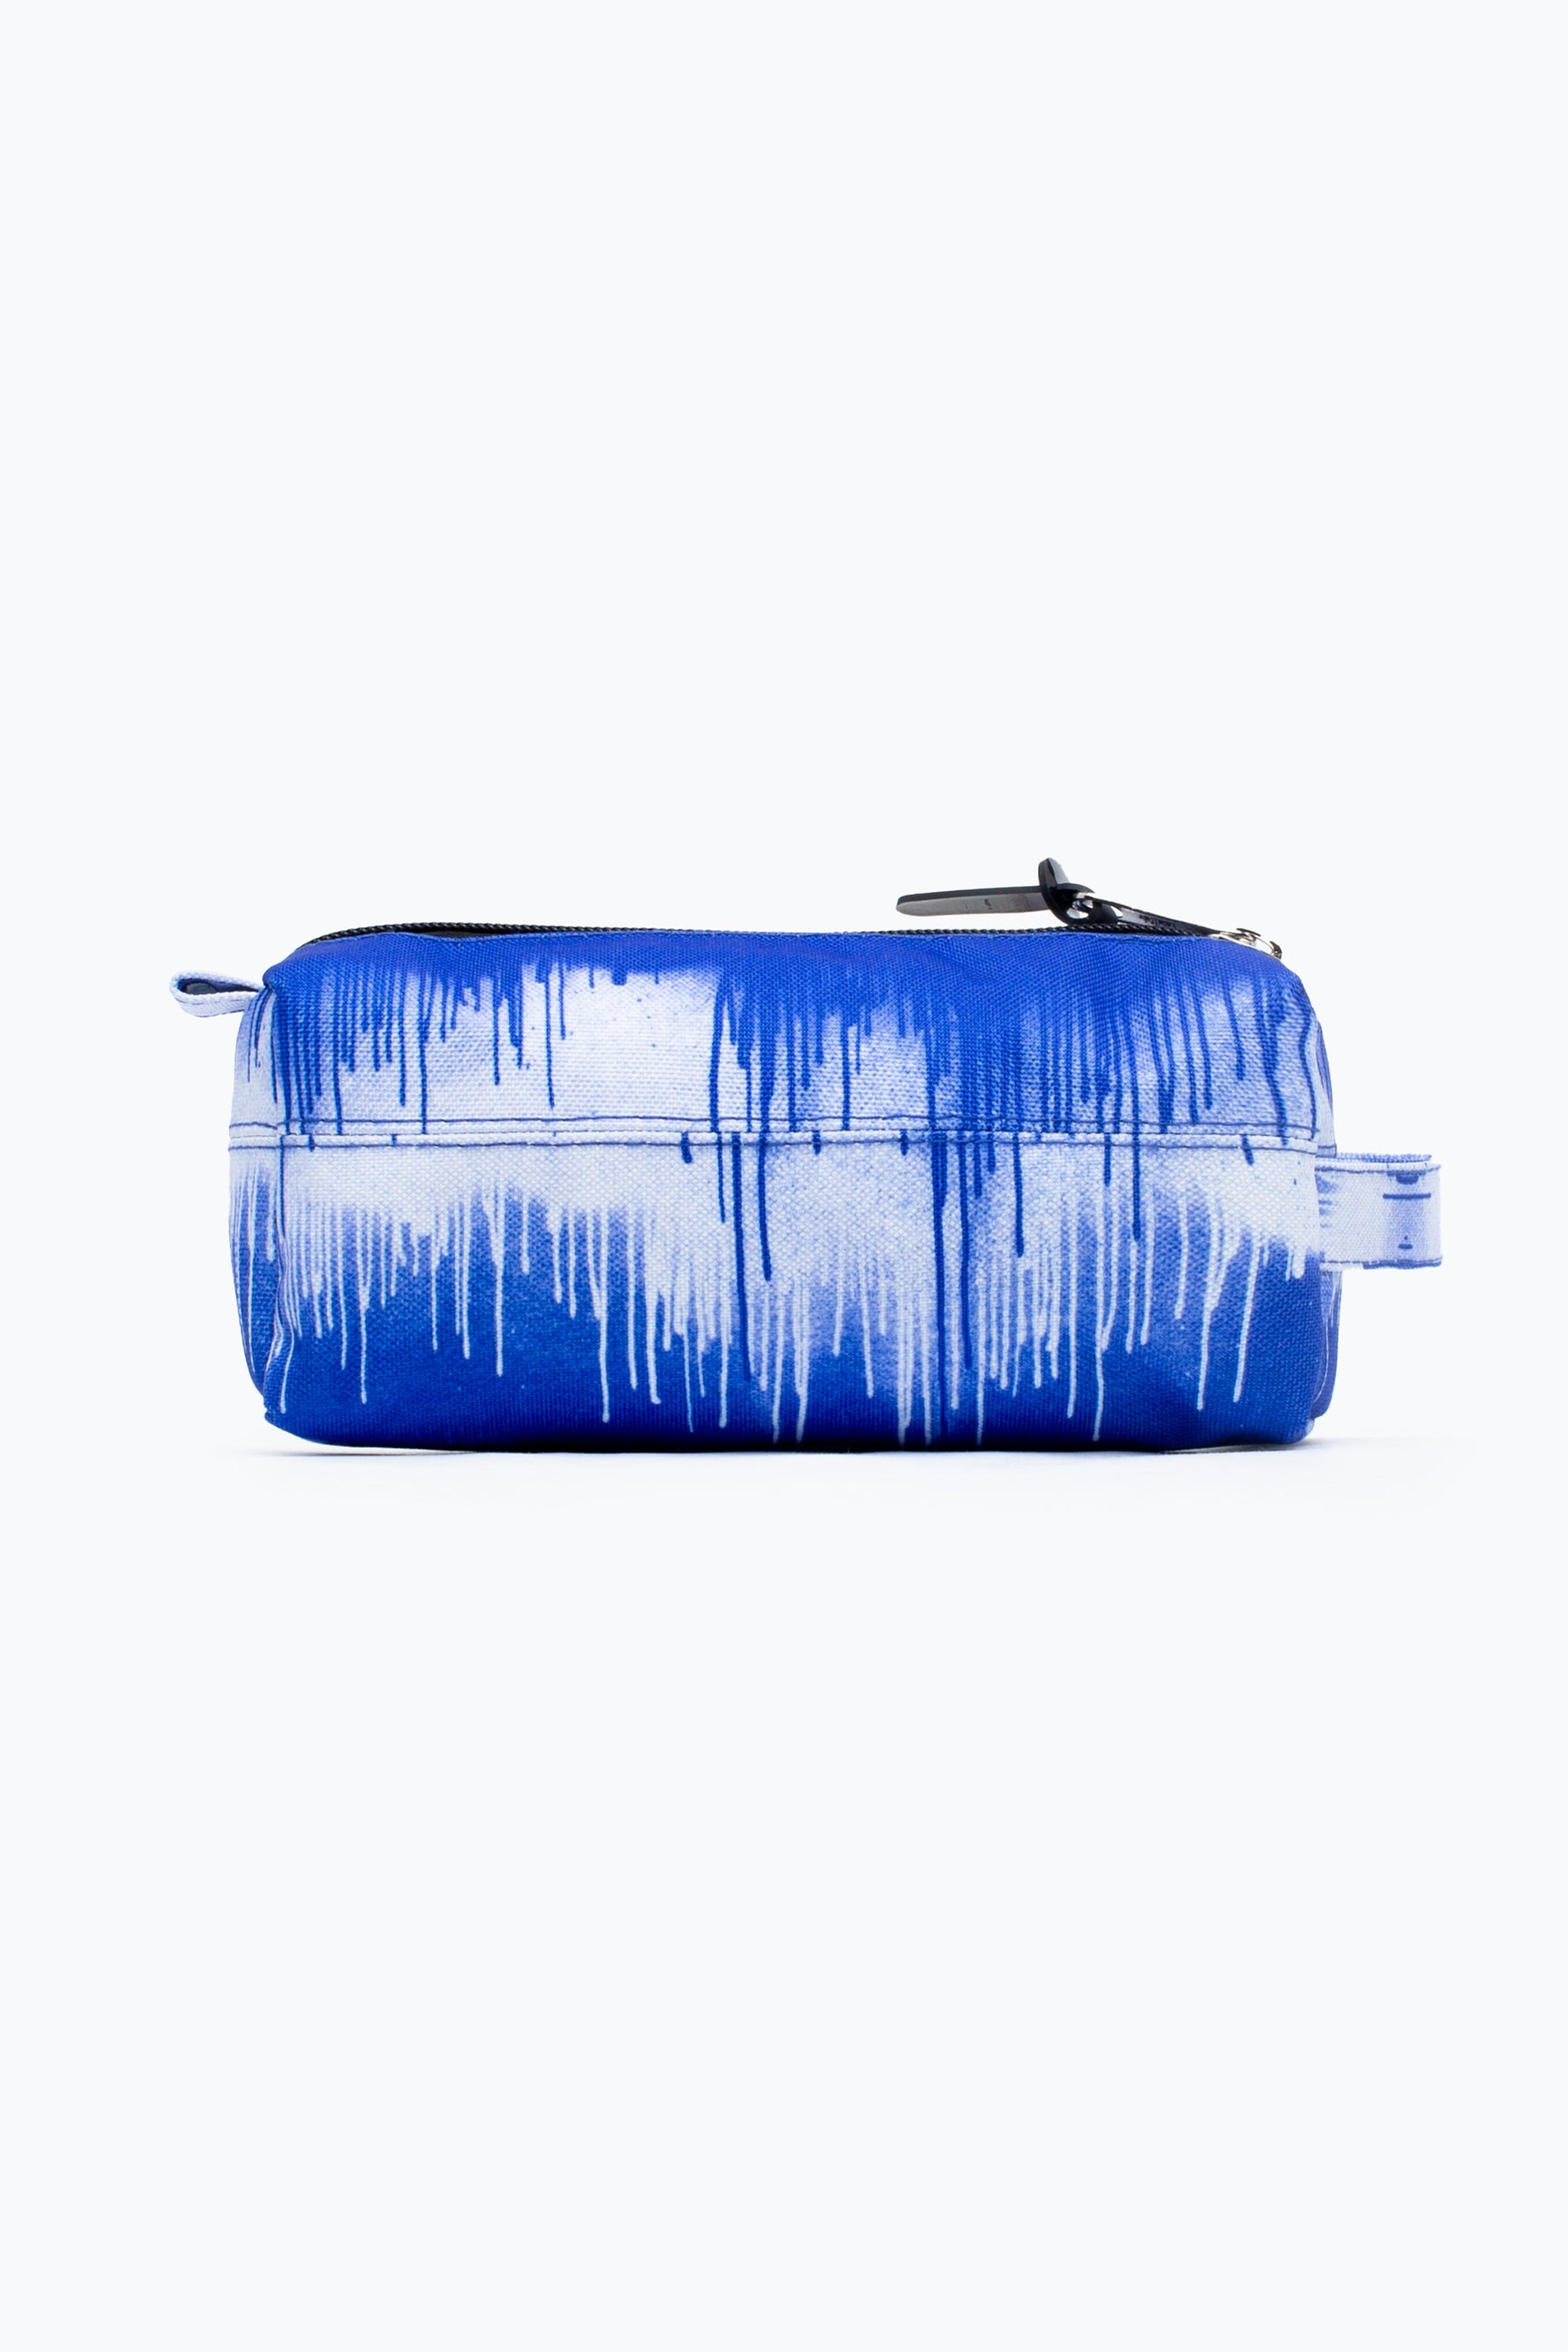 Alternate View 1 of HYPE ROYAL BLUE SINGLE DRIP PENCIL CASE